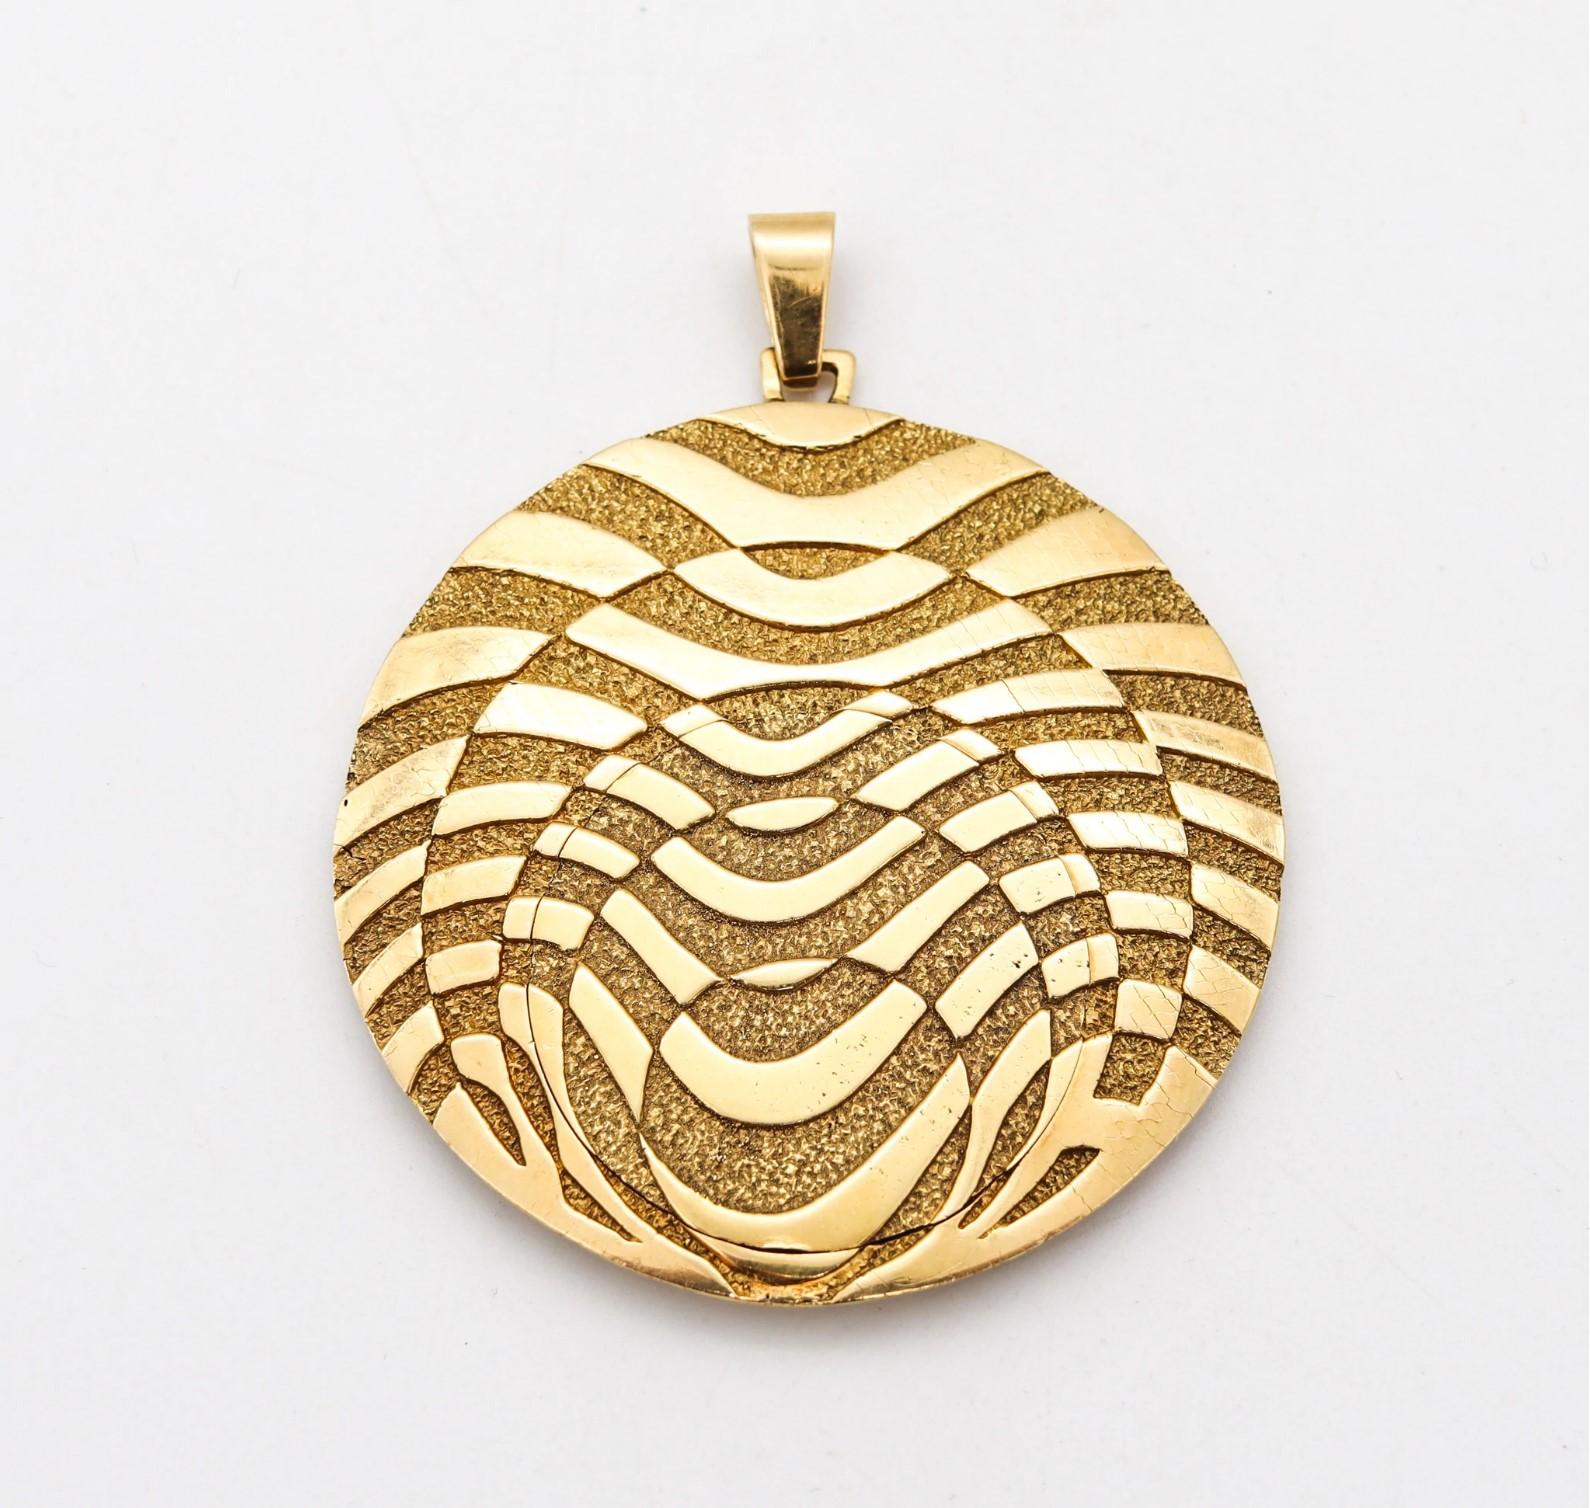 An Op-Art pendant watch by George L'Enfant for Rolex Watch Co.

A fantastic and extremely rare piece, created in Paris France at the atelier of L'Enfant for the Rolex Watch Co, back in the 1970's. This pendant watch has been crafted in solid yellow